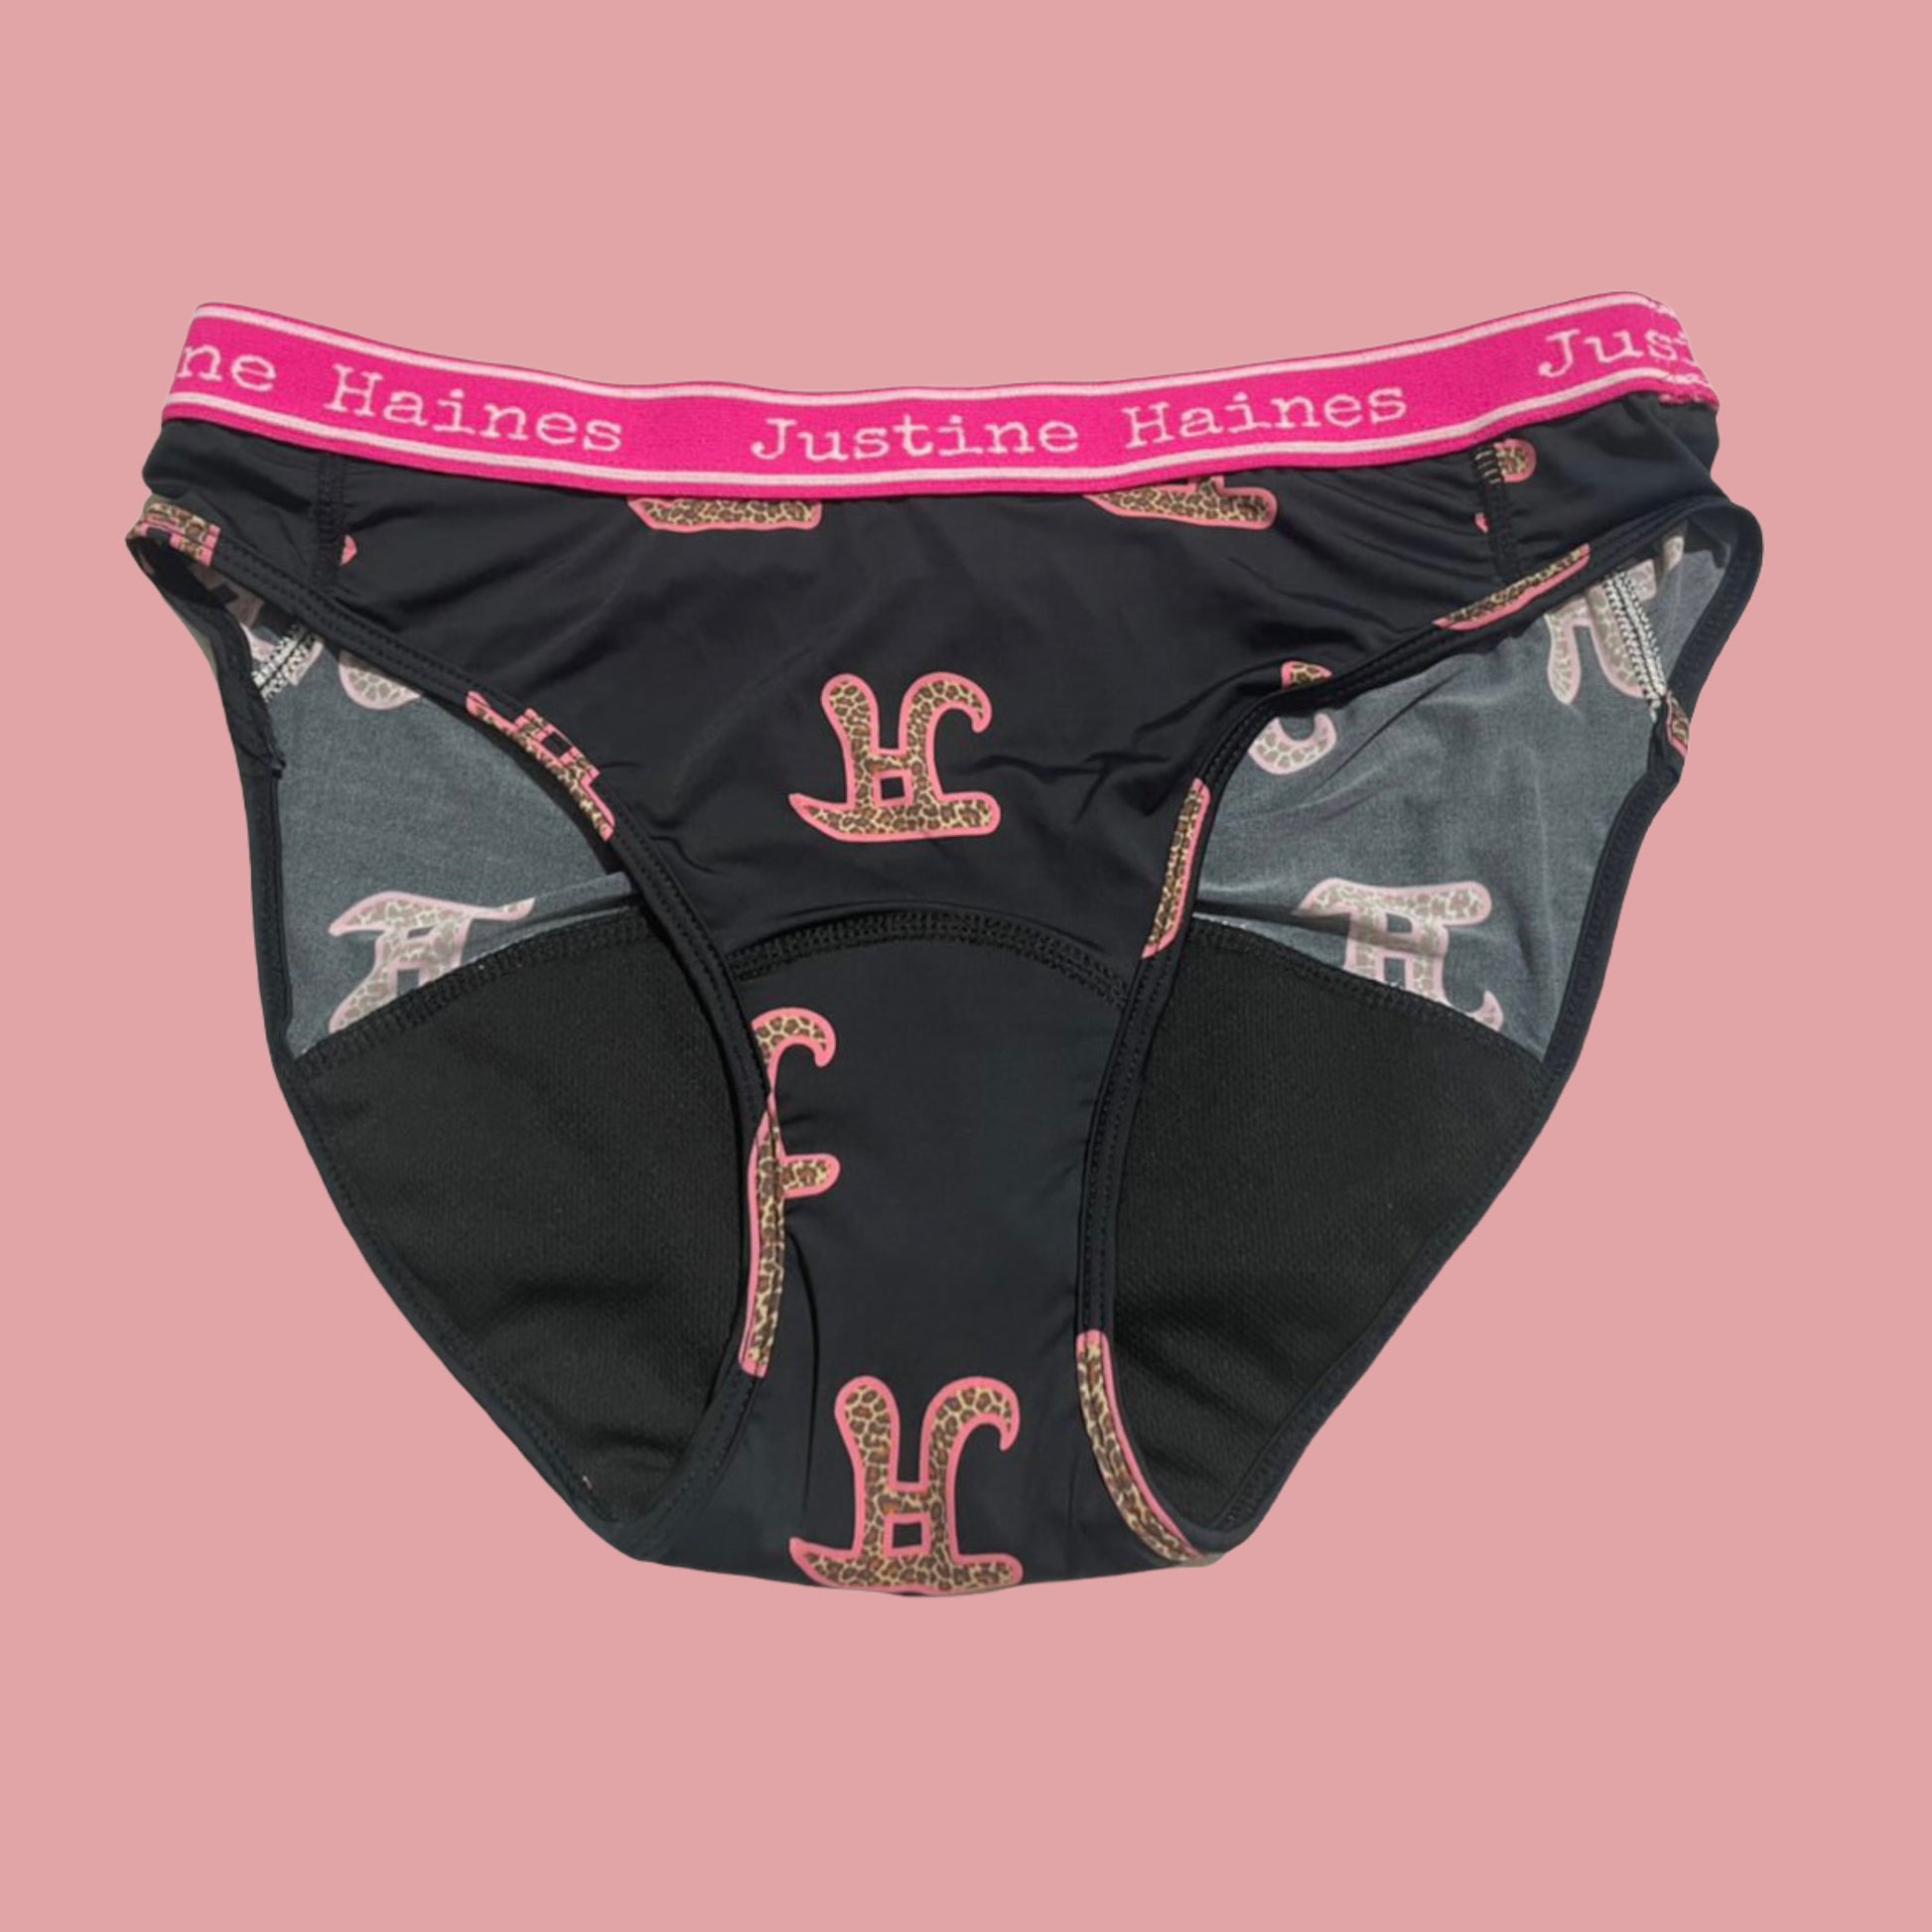 https://www.justinehaines.com/products/adorable-low-rise-fashion-print-period-panties-in-jh-logo-with-leopard